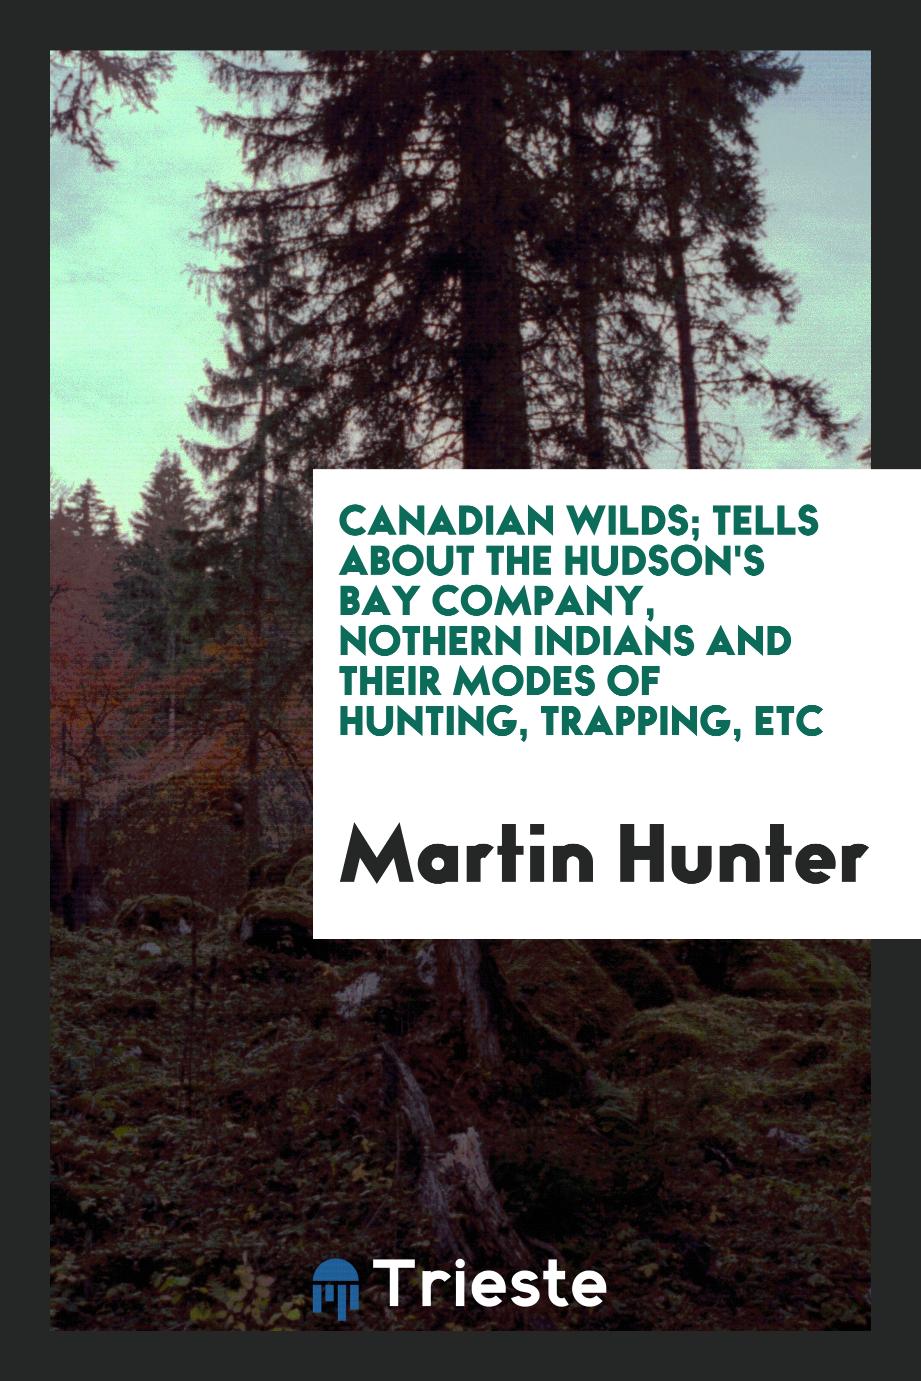 Canadian wilds; tells about the Hudson's Bay Company, nothern Indians and their modes of hunting, trapping, etc